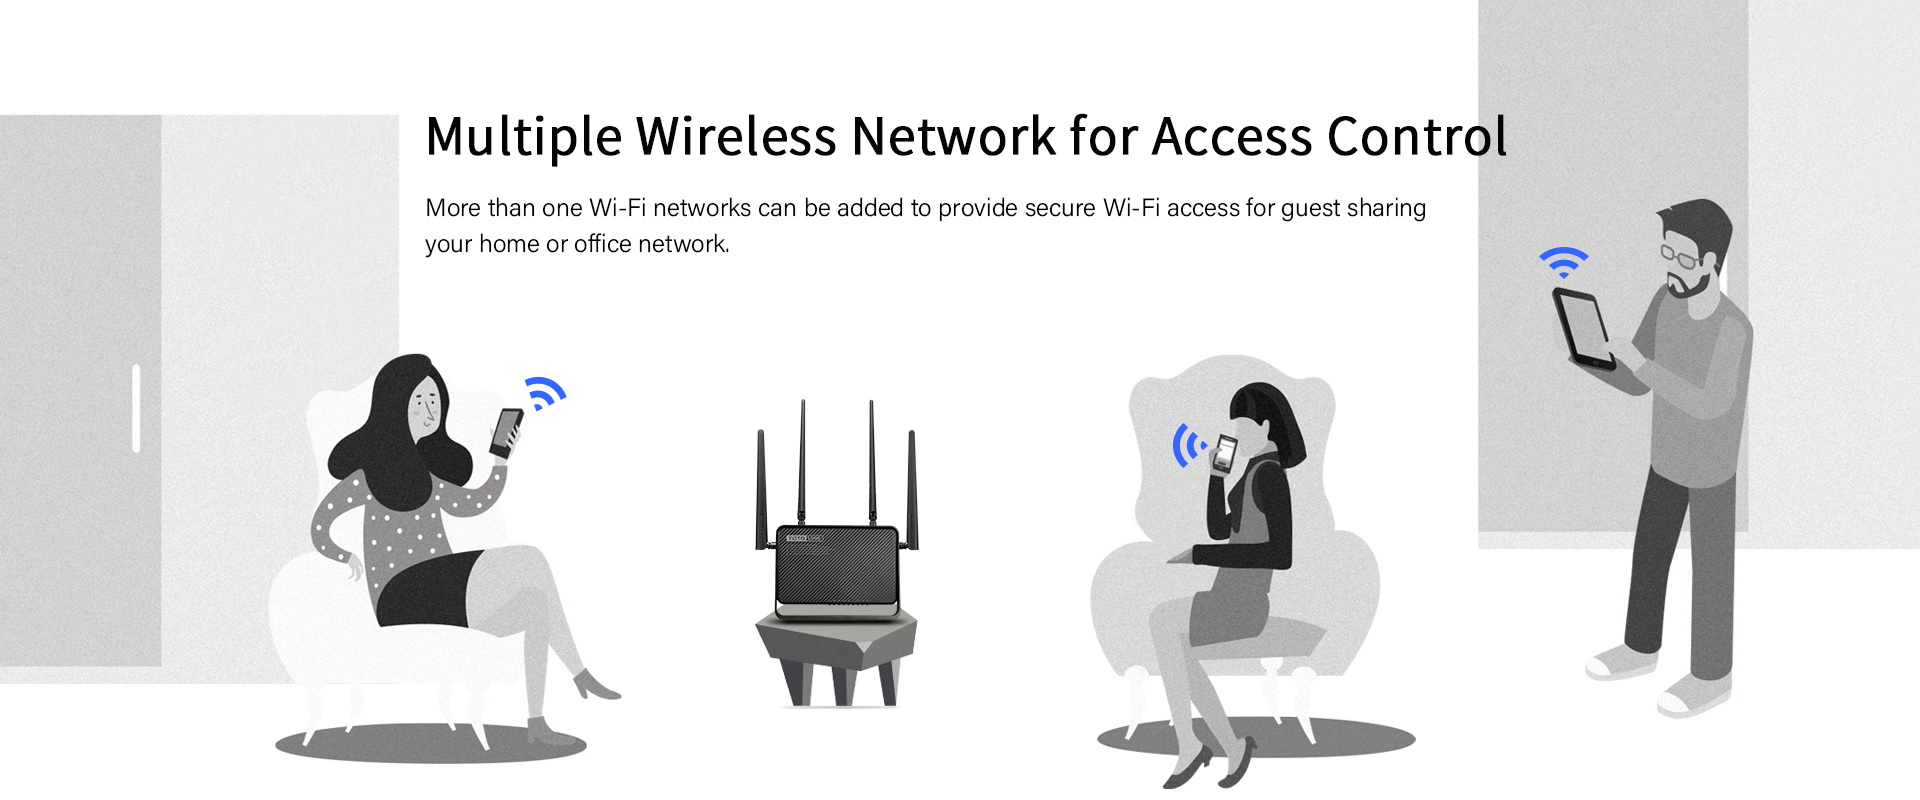 Multiple wireless Network for access control